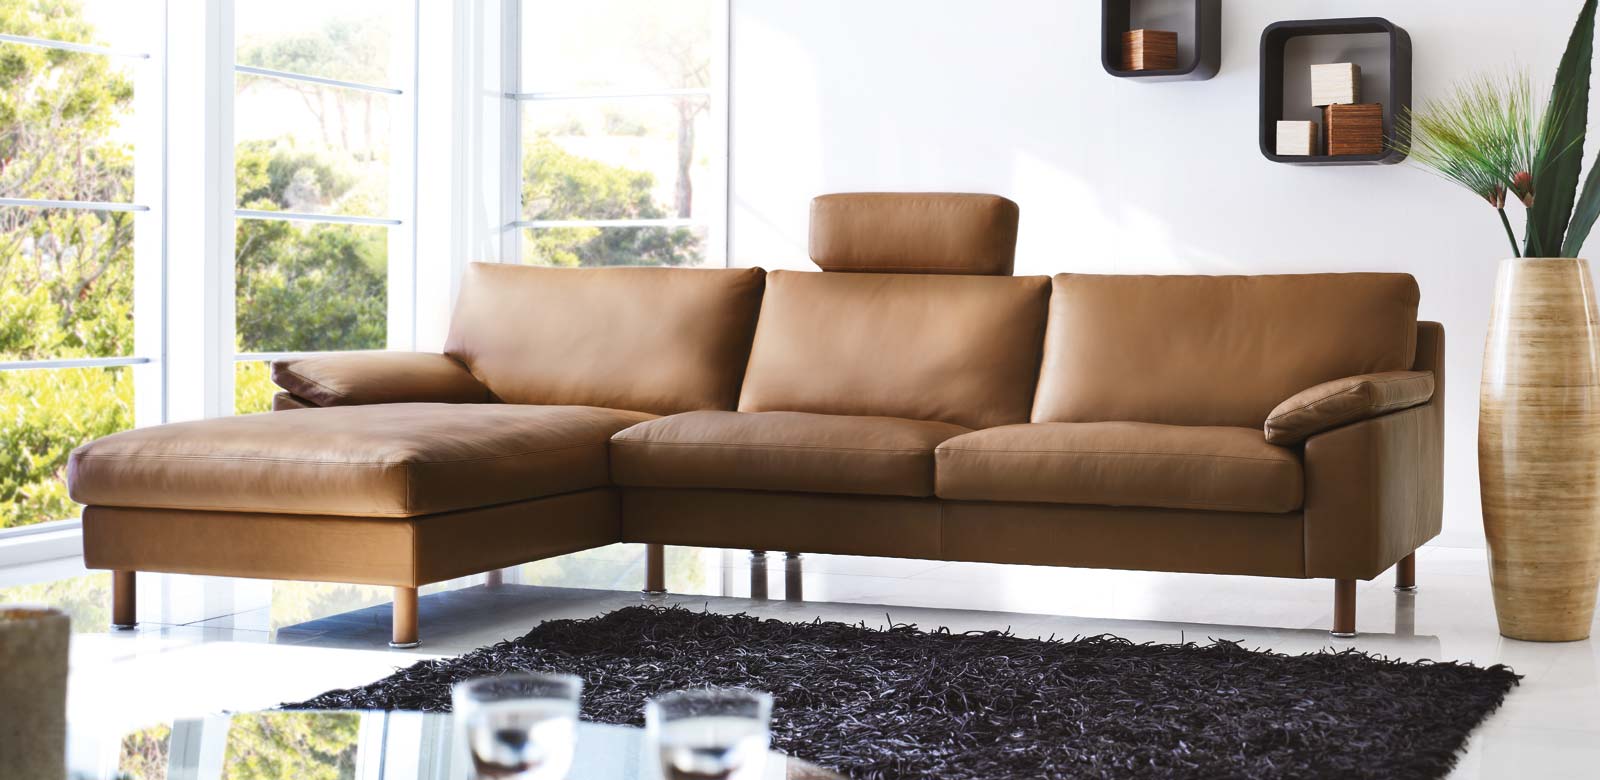 CL650 Longchair Sofa in Brown Leather with Centre Headrest